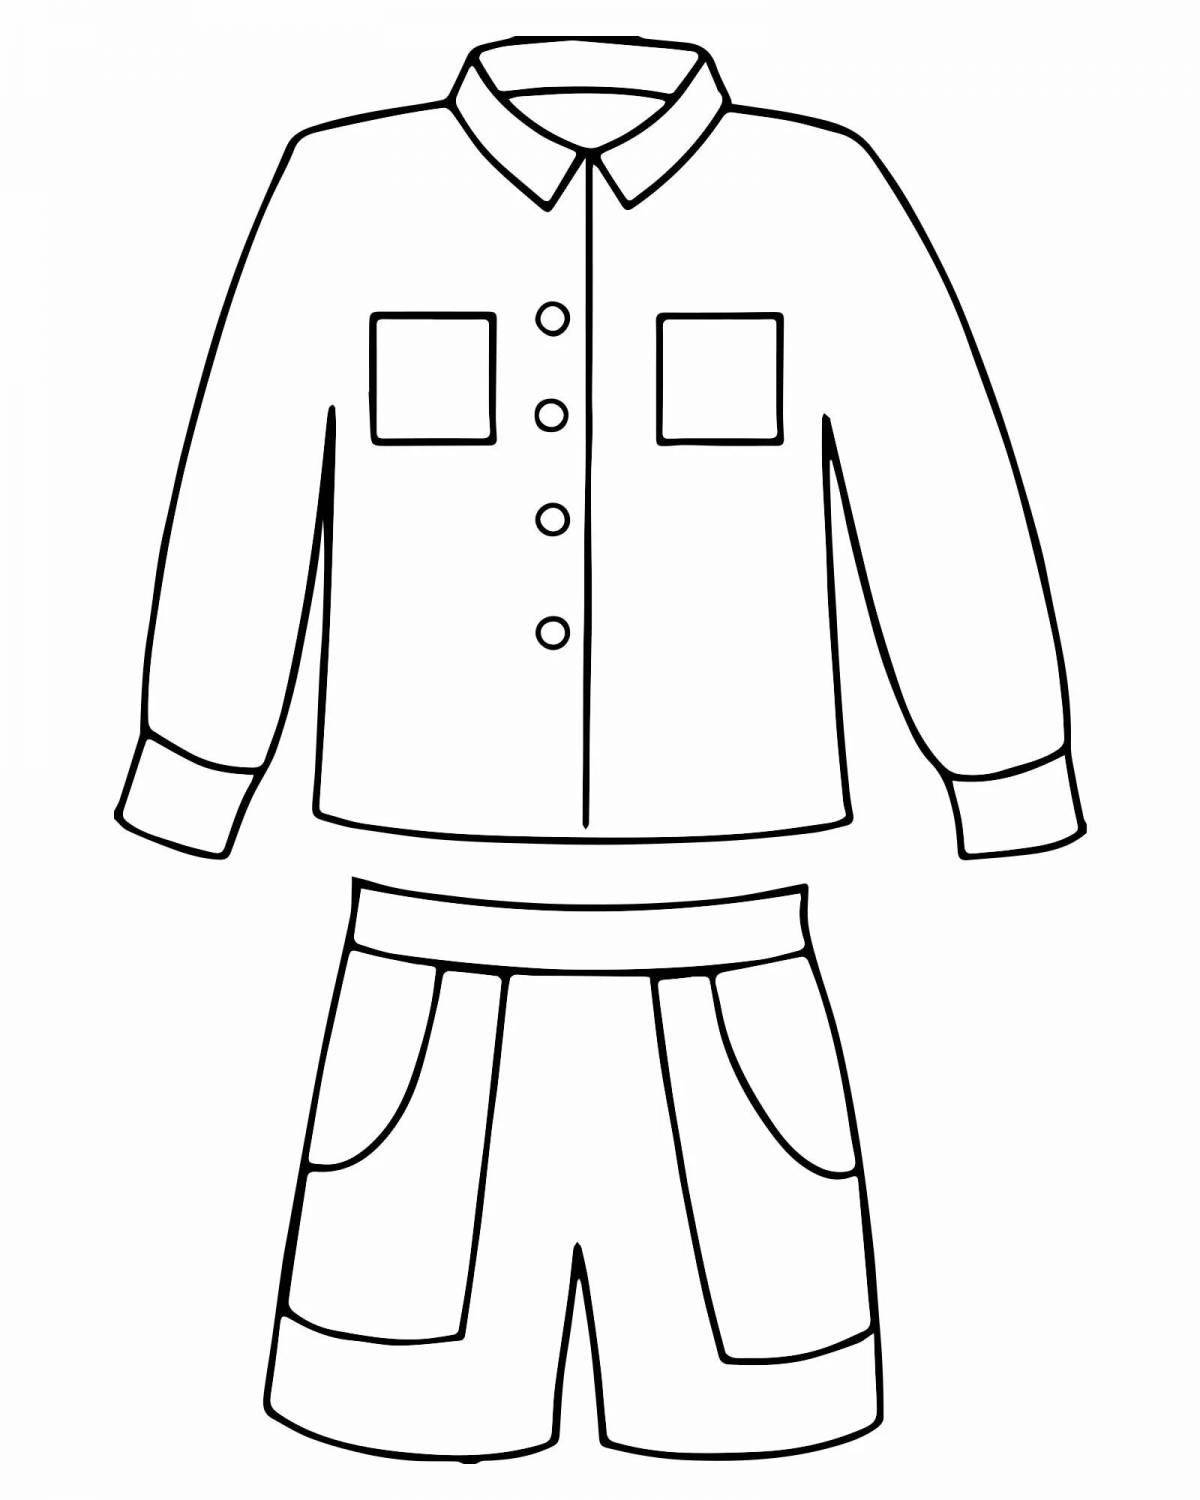 Creative coloring shirt for 4-5 year olds